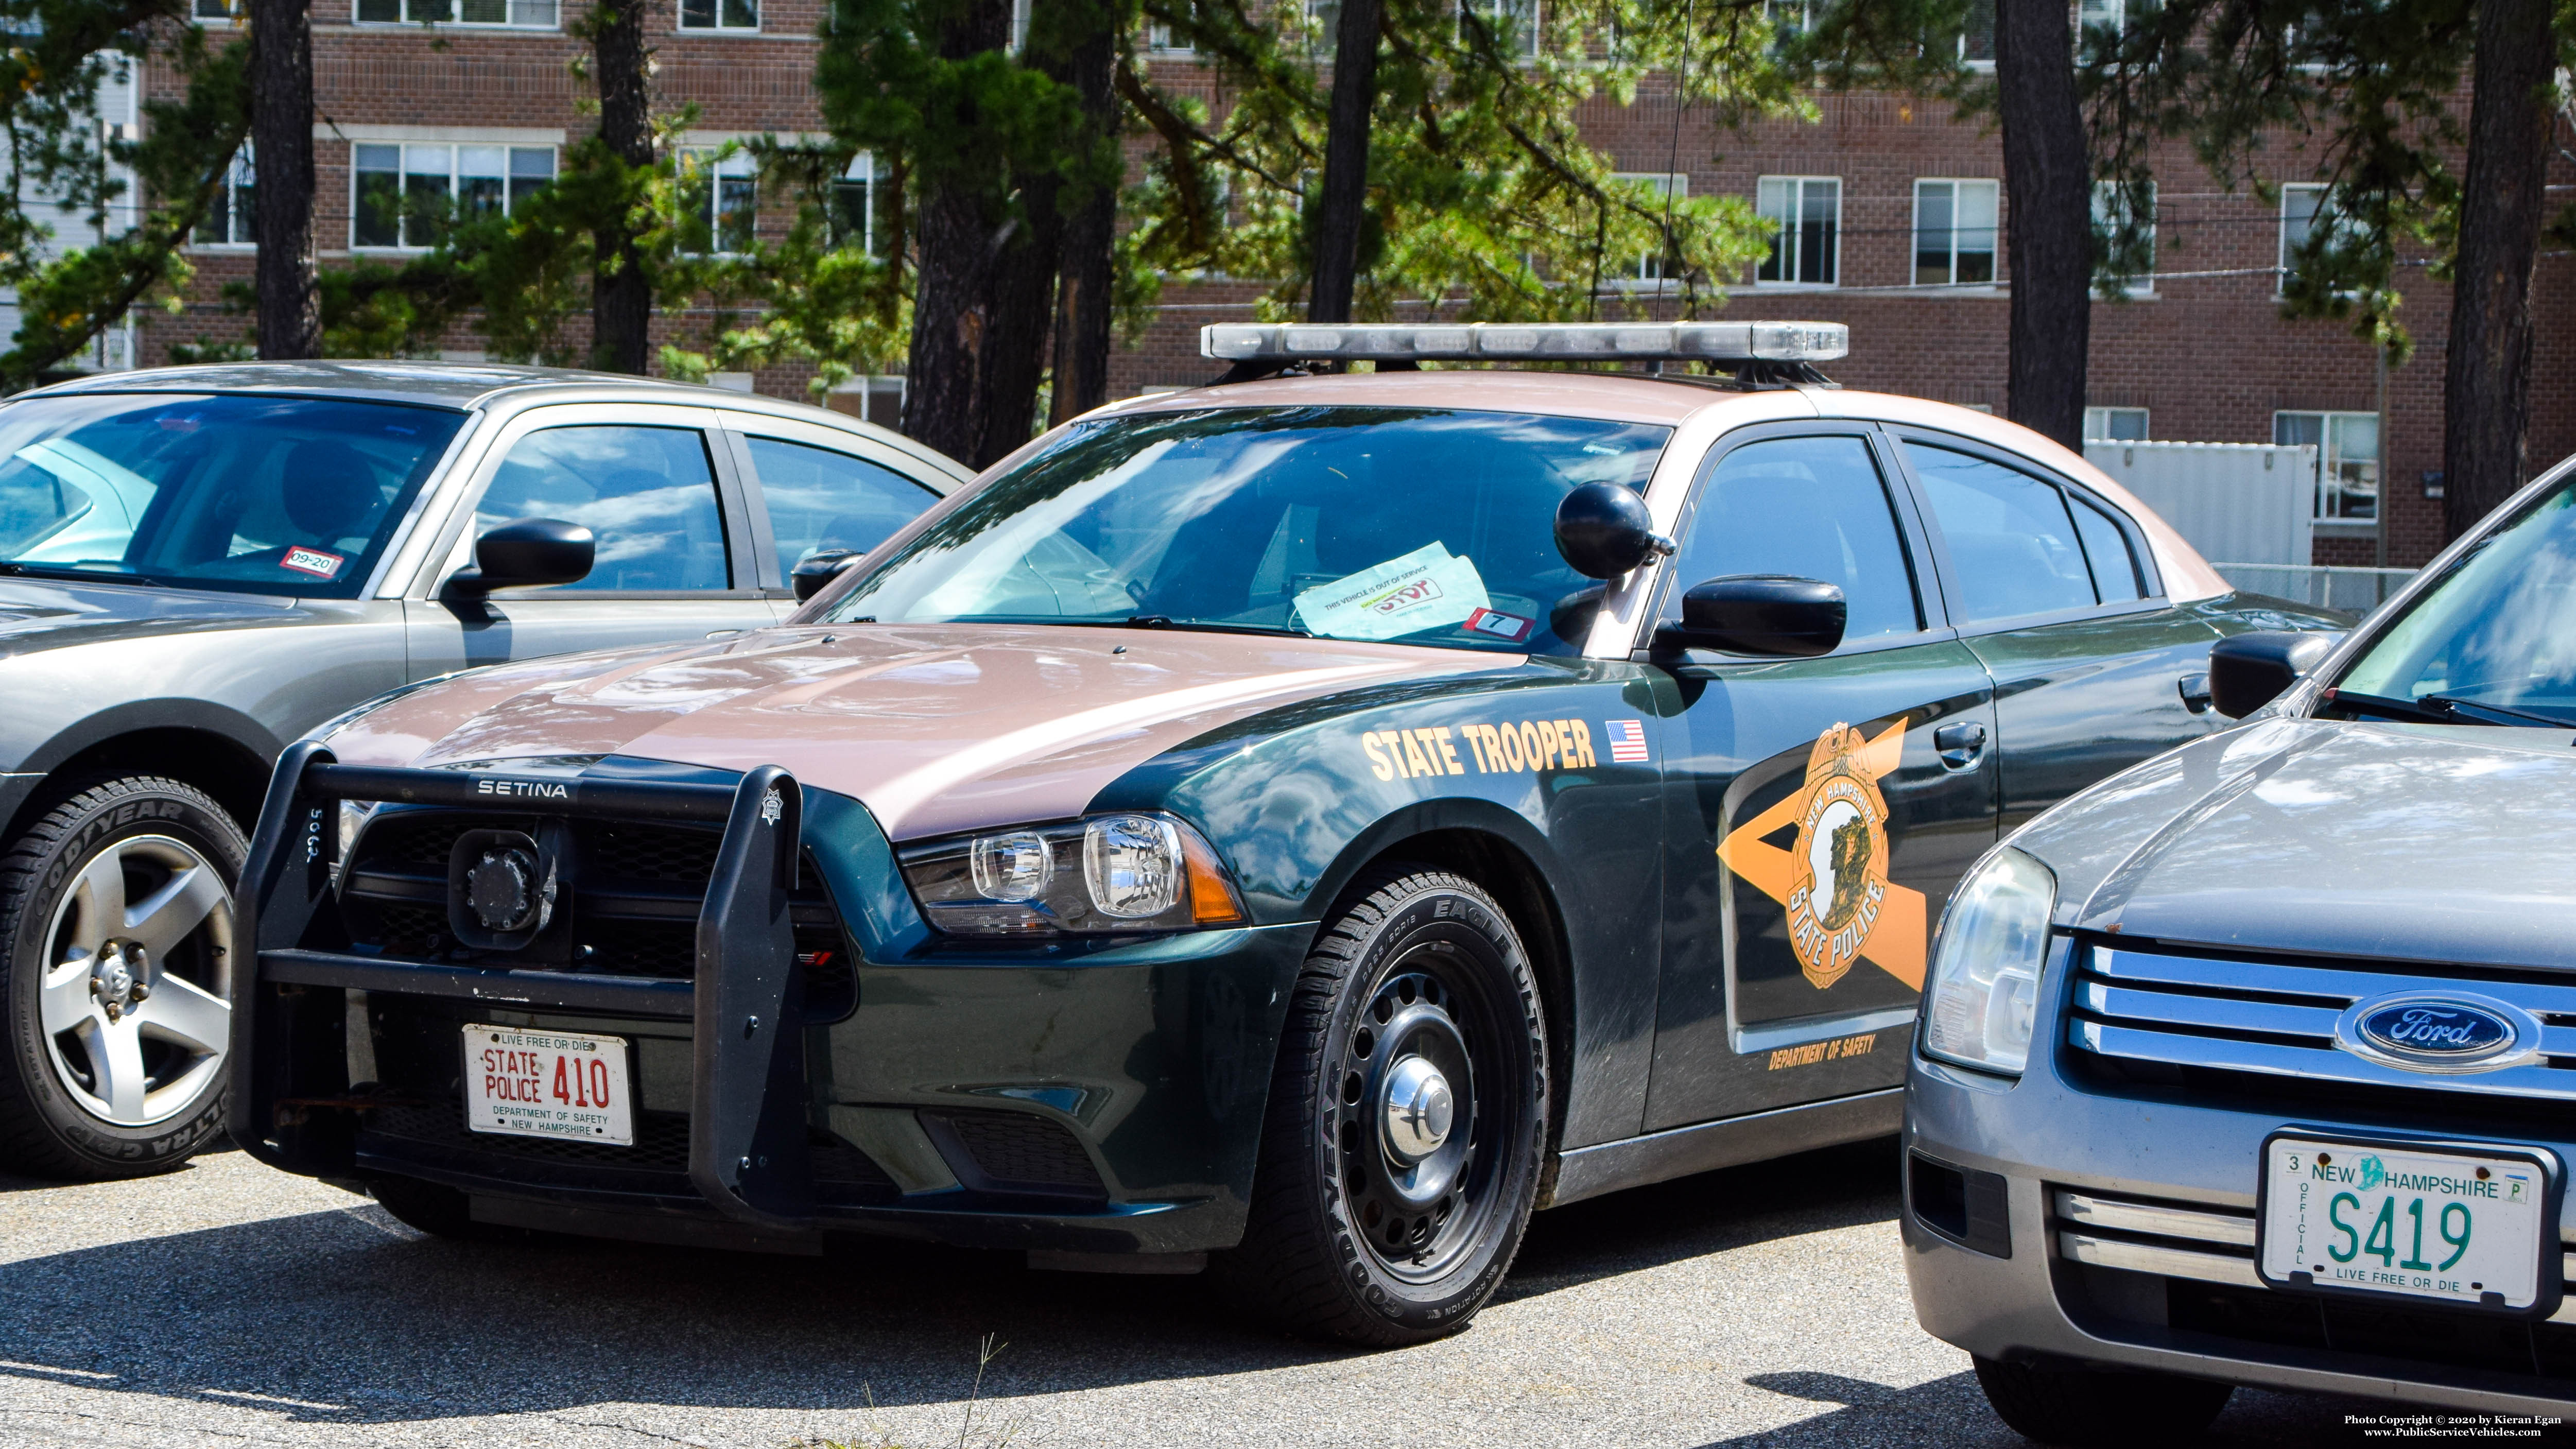 A photo  of New Hampshire State Police
            Cruiser 410, a 2011-2014 Dodge Charger             taken by Kieran Egan